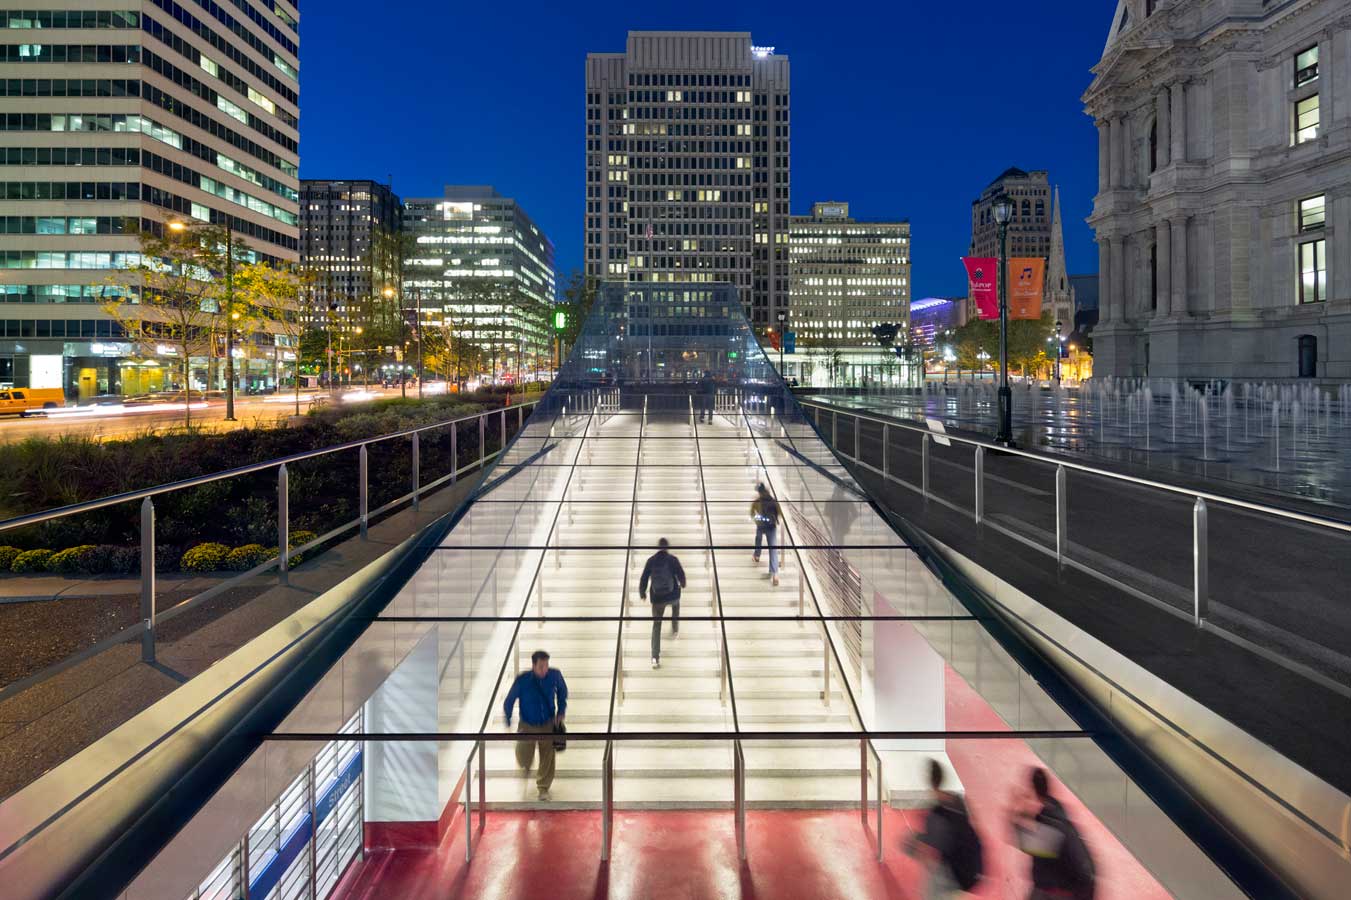 <p>Improved light quality in the concourse, combined with illuminated access points and a new way-finding system all contribute to safer and clearer passage. <br><small>&copy; James Ewing Photography</small></p>